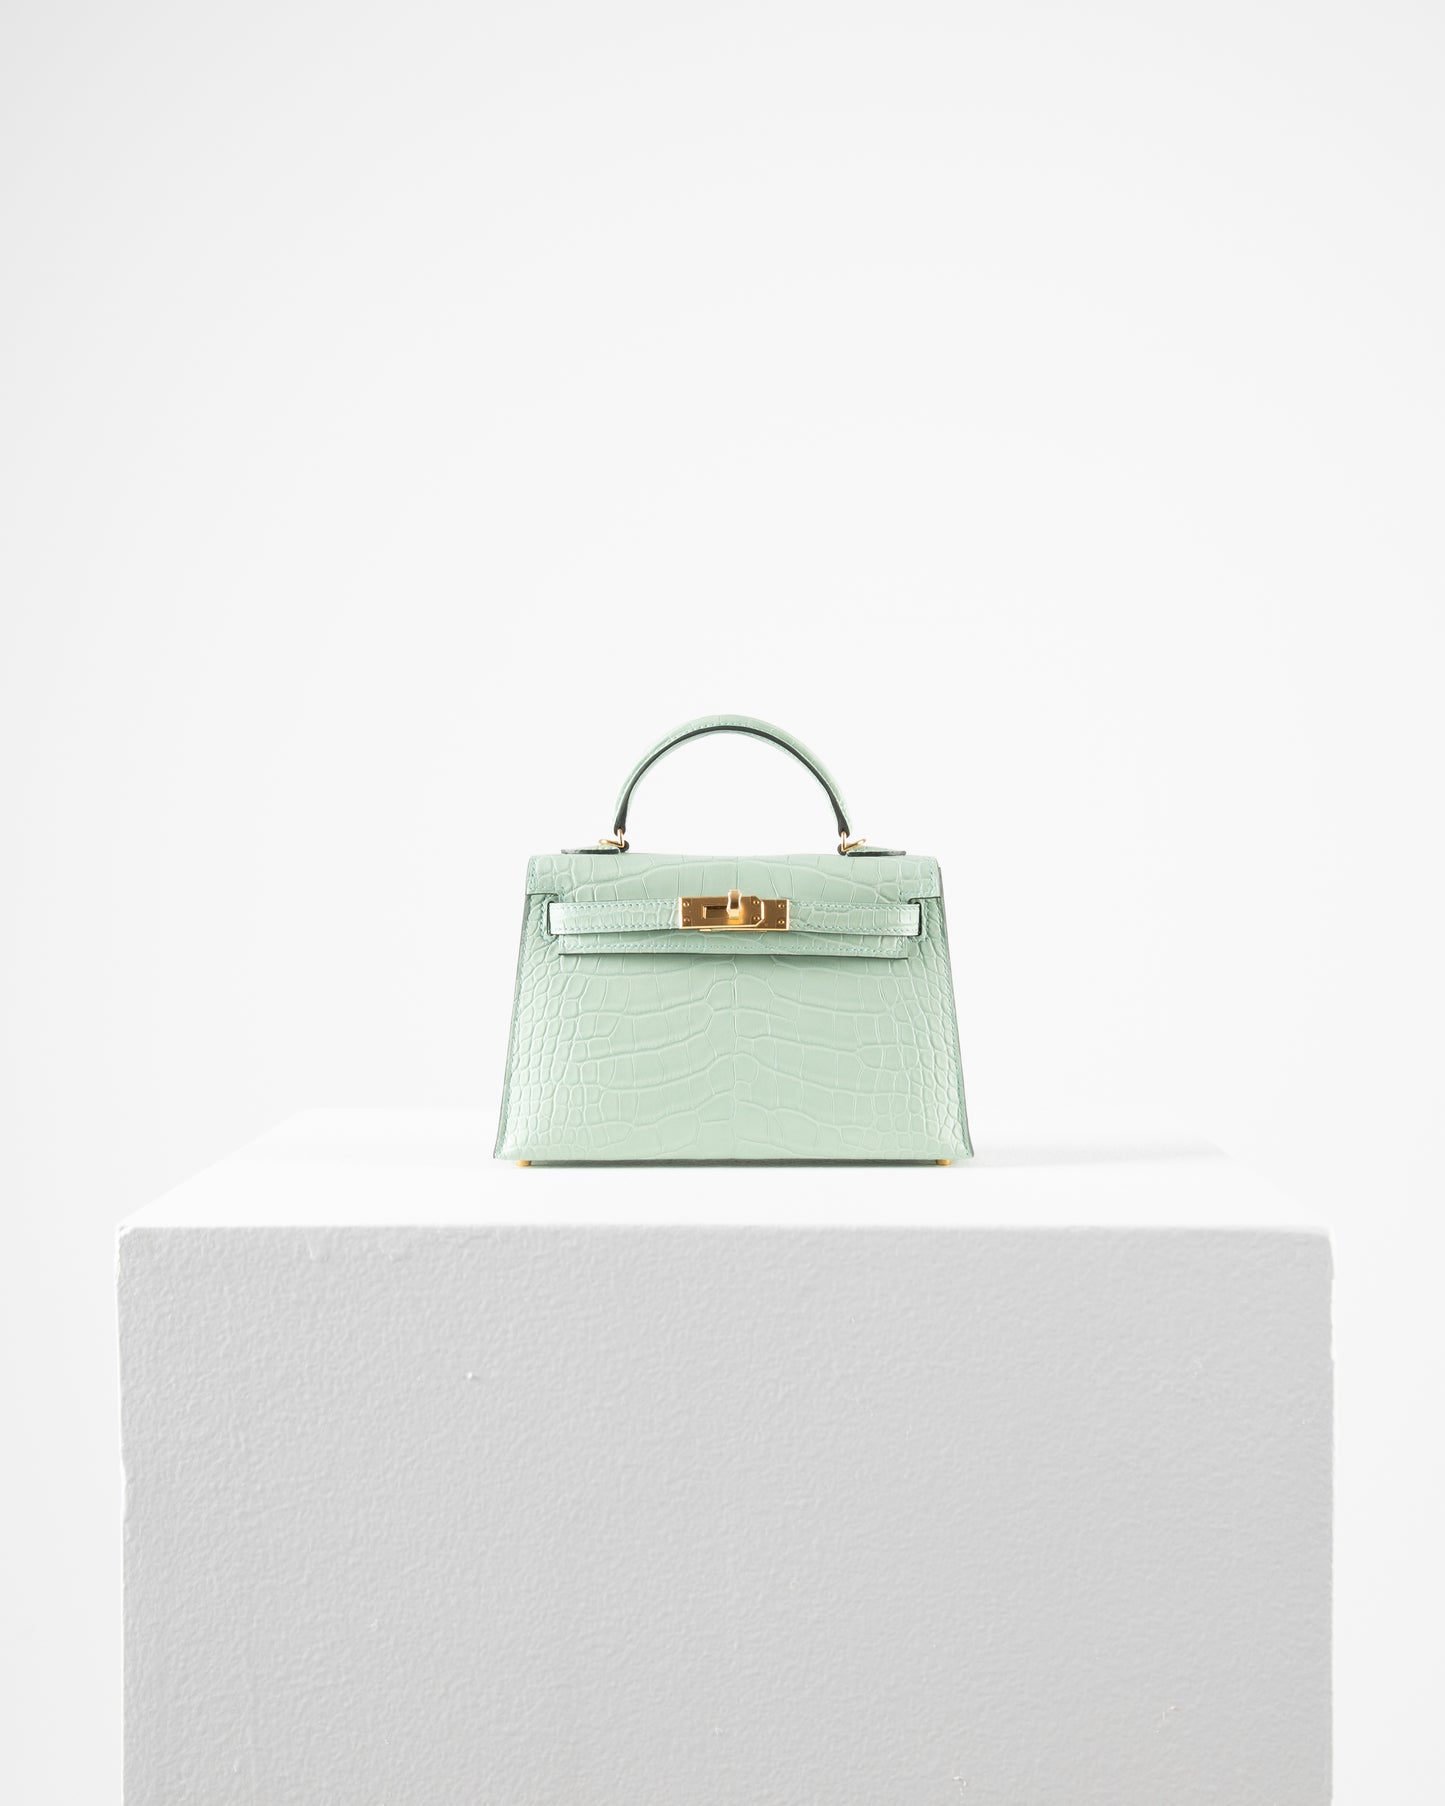 Hermès Vert Criquet Chèvre Mysore Mini Kelly II 20 Gold Hardware, 2021  Available For Immediate Sale At Sotheby's